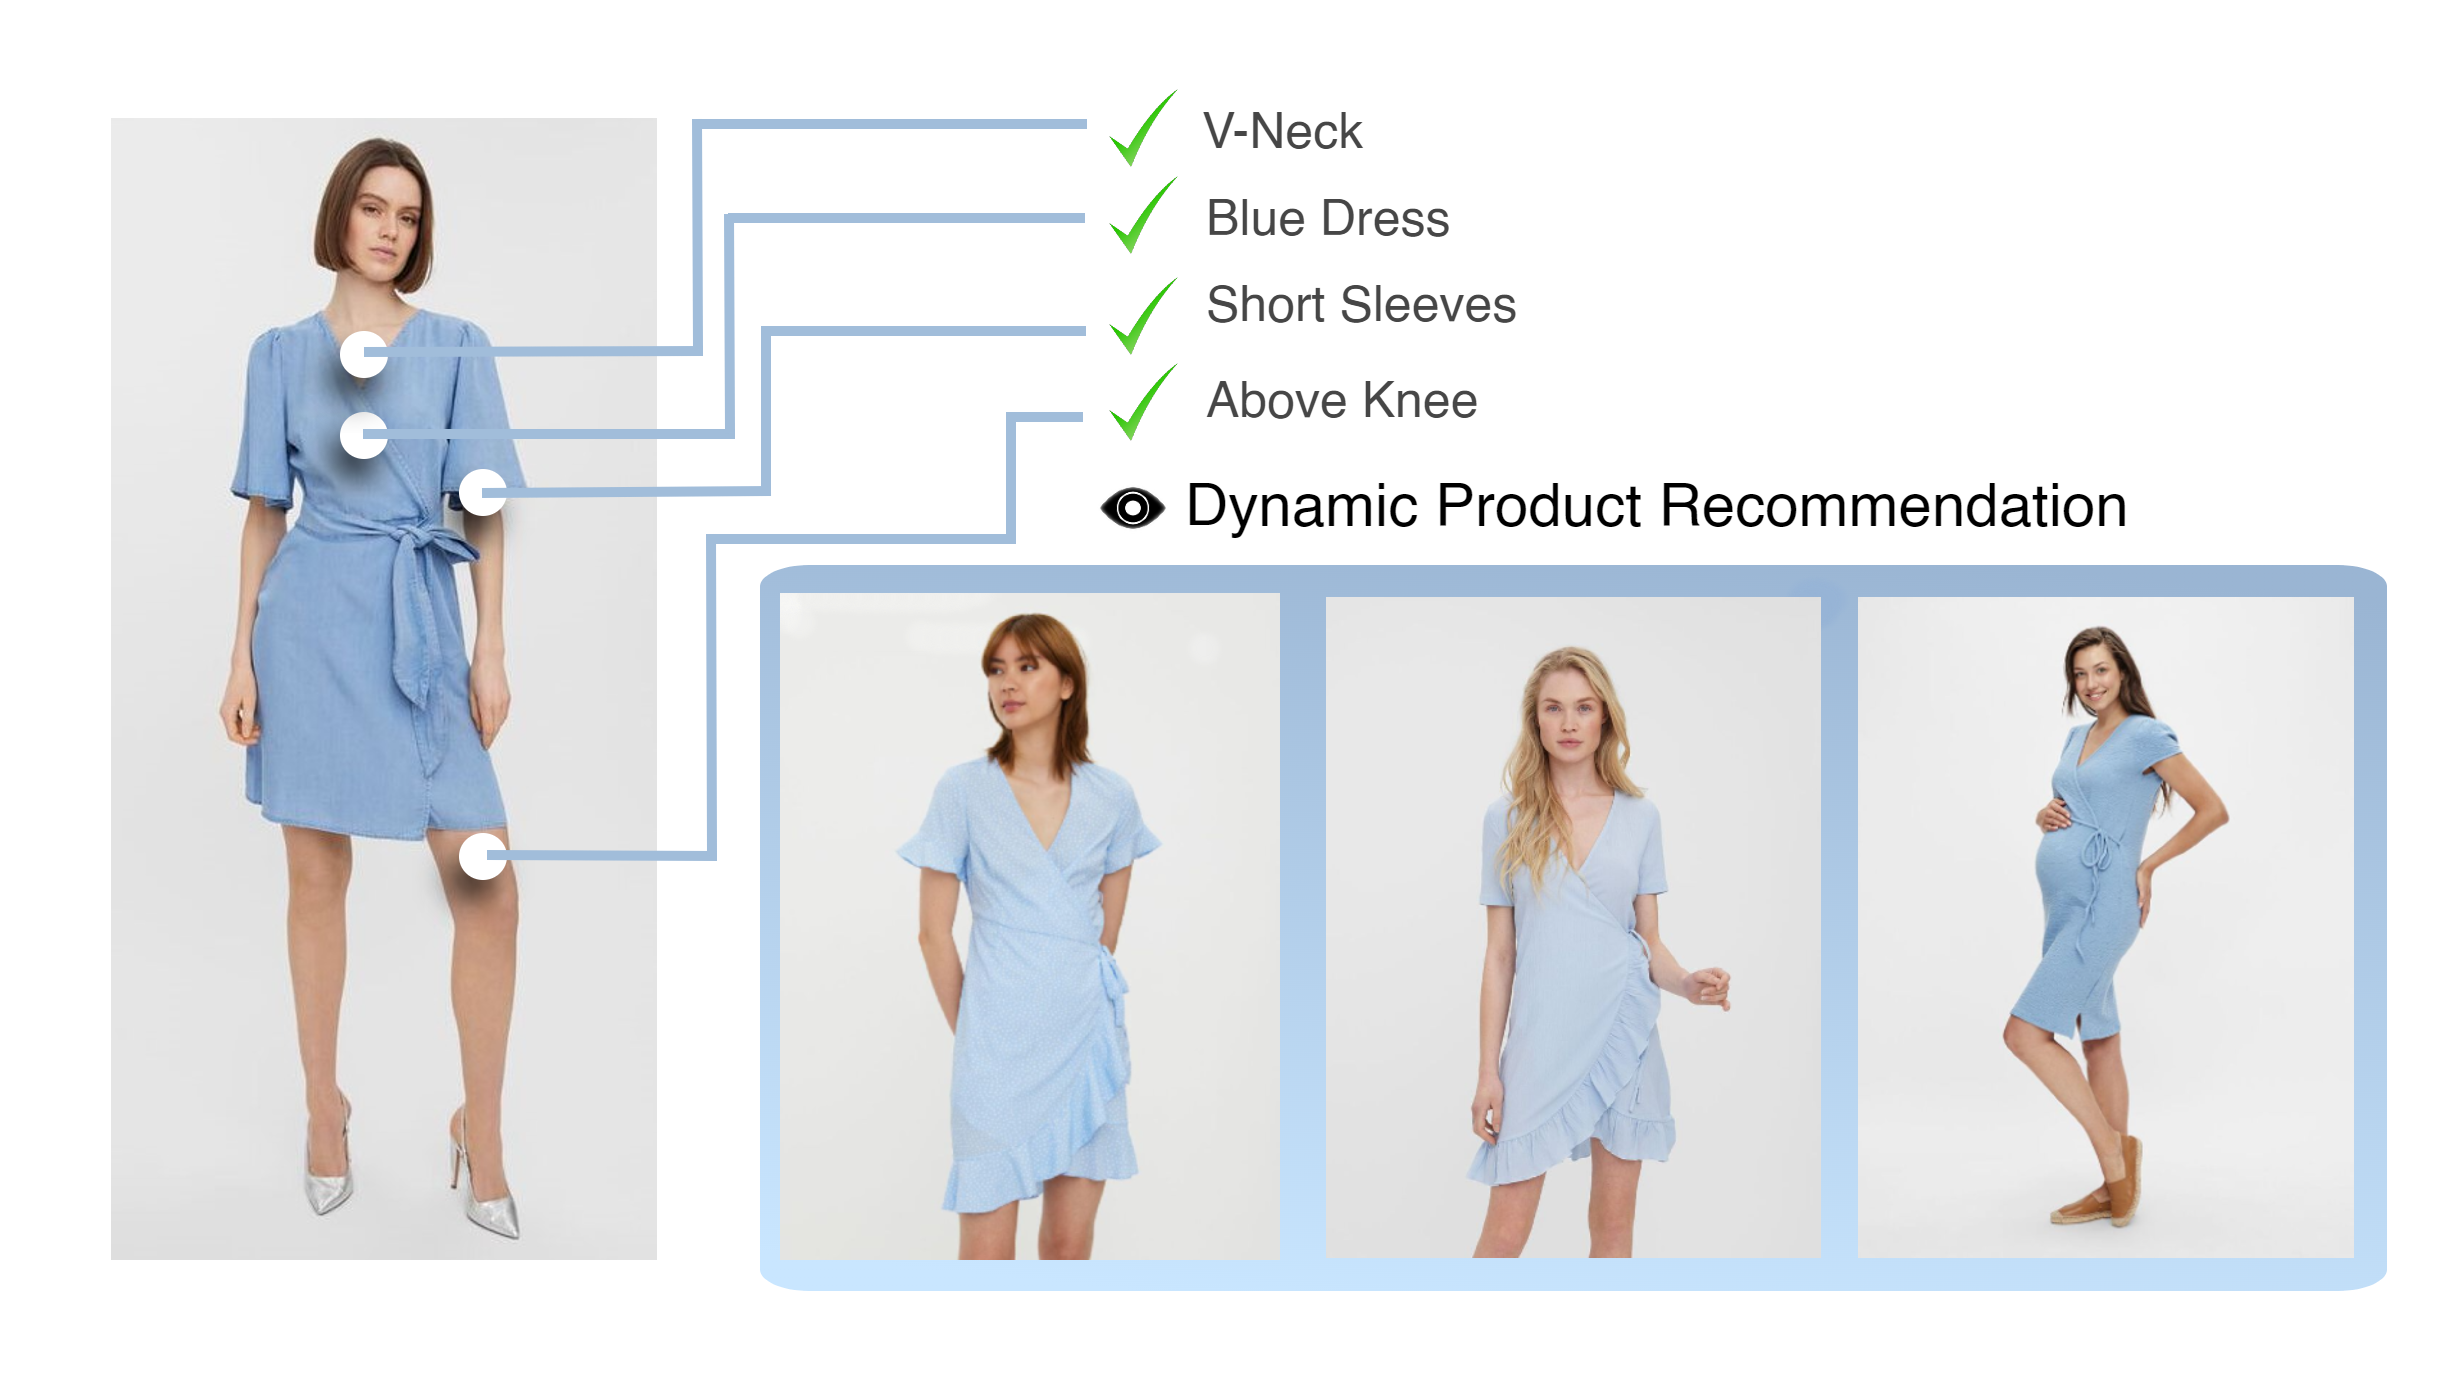 Visual search for dynamic product recommendations